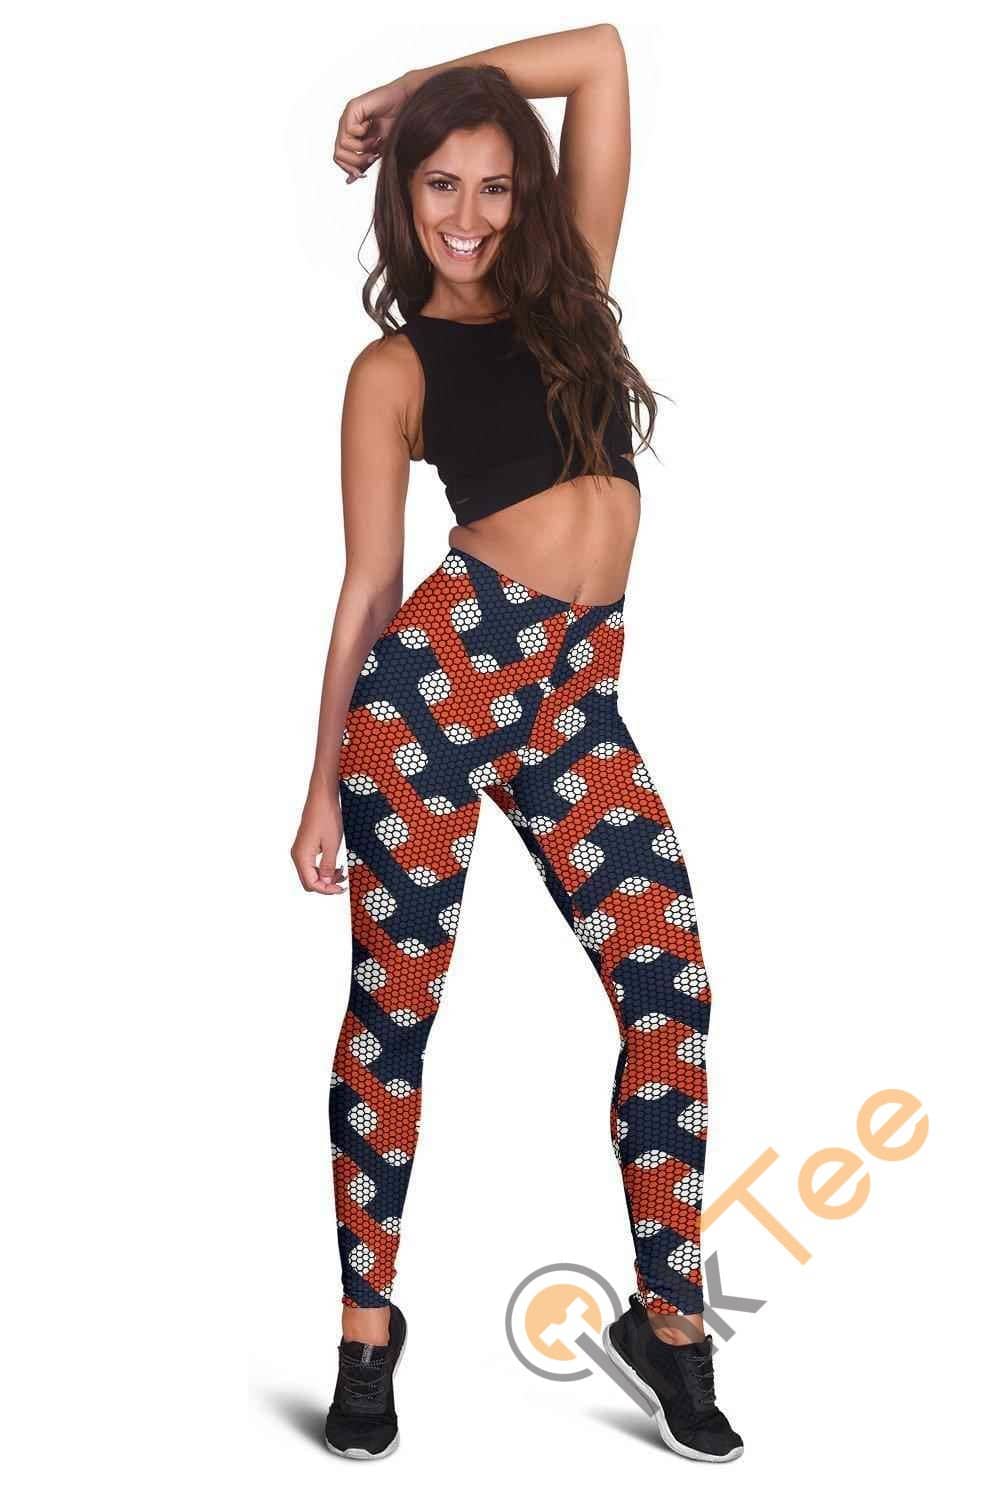 Inktee Store - Virginia Cavaliers Inspired Liberty 3D All Over Print For Yoga Fitness Fashion Women'S Leggings Image